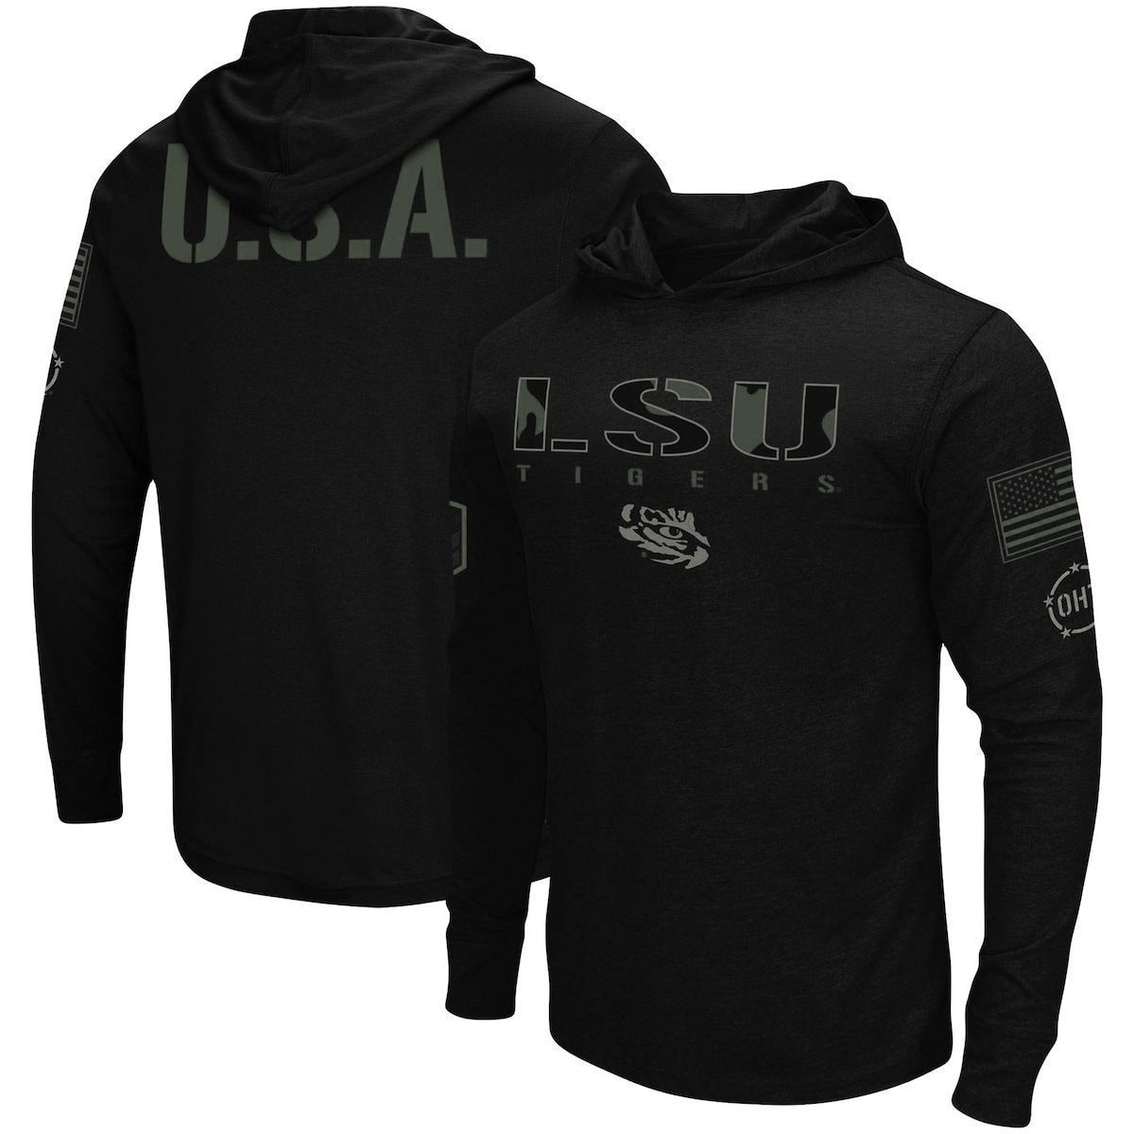 Colosseum Men's Black LSU Tigers OHT Military Appreciation Hoodie Long Sleeve T-Shirt - Image 2 of 4